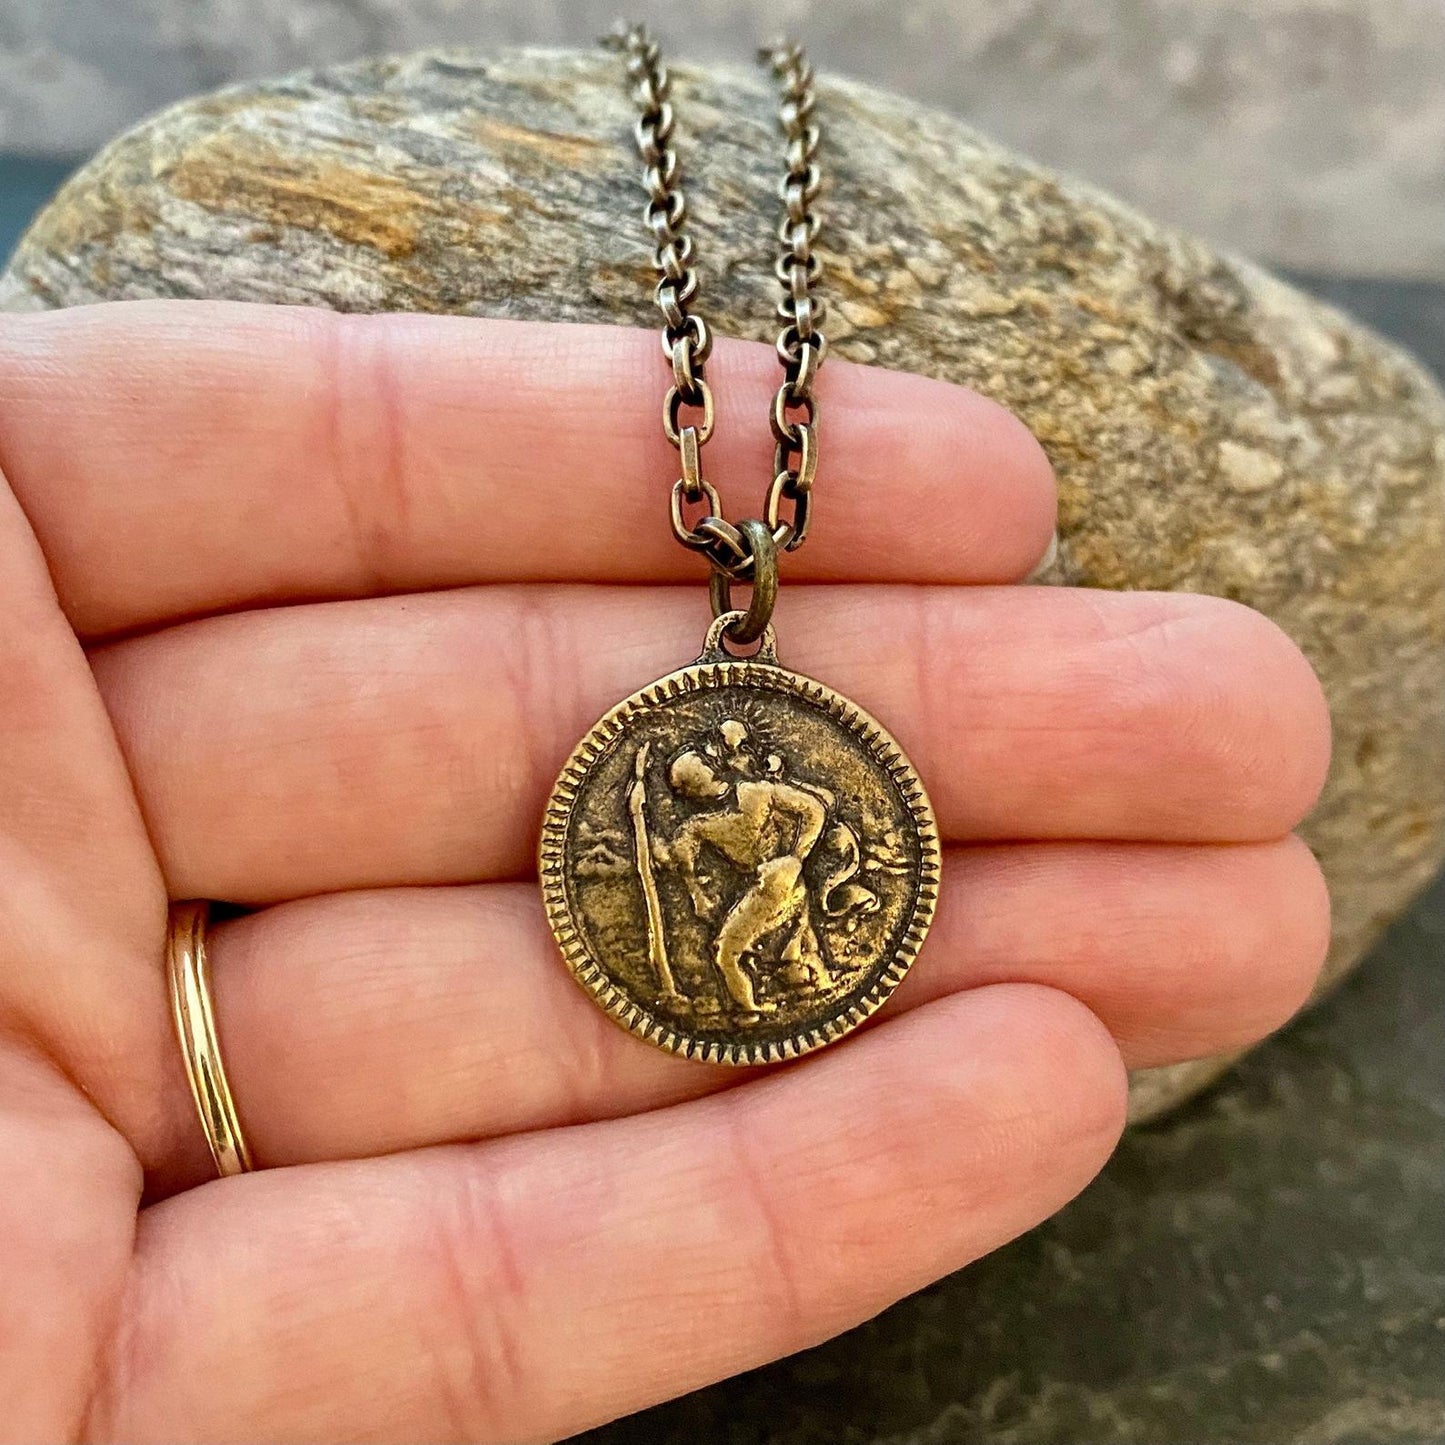 Men's Antiqued Brass Necklace with Round St. Christopher Medal, Unisex Jewelry, Chain length 20 or 24 inches BR-056